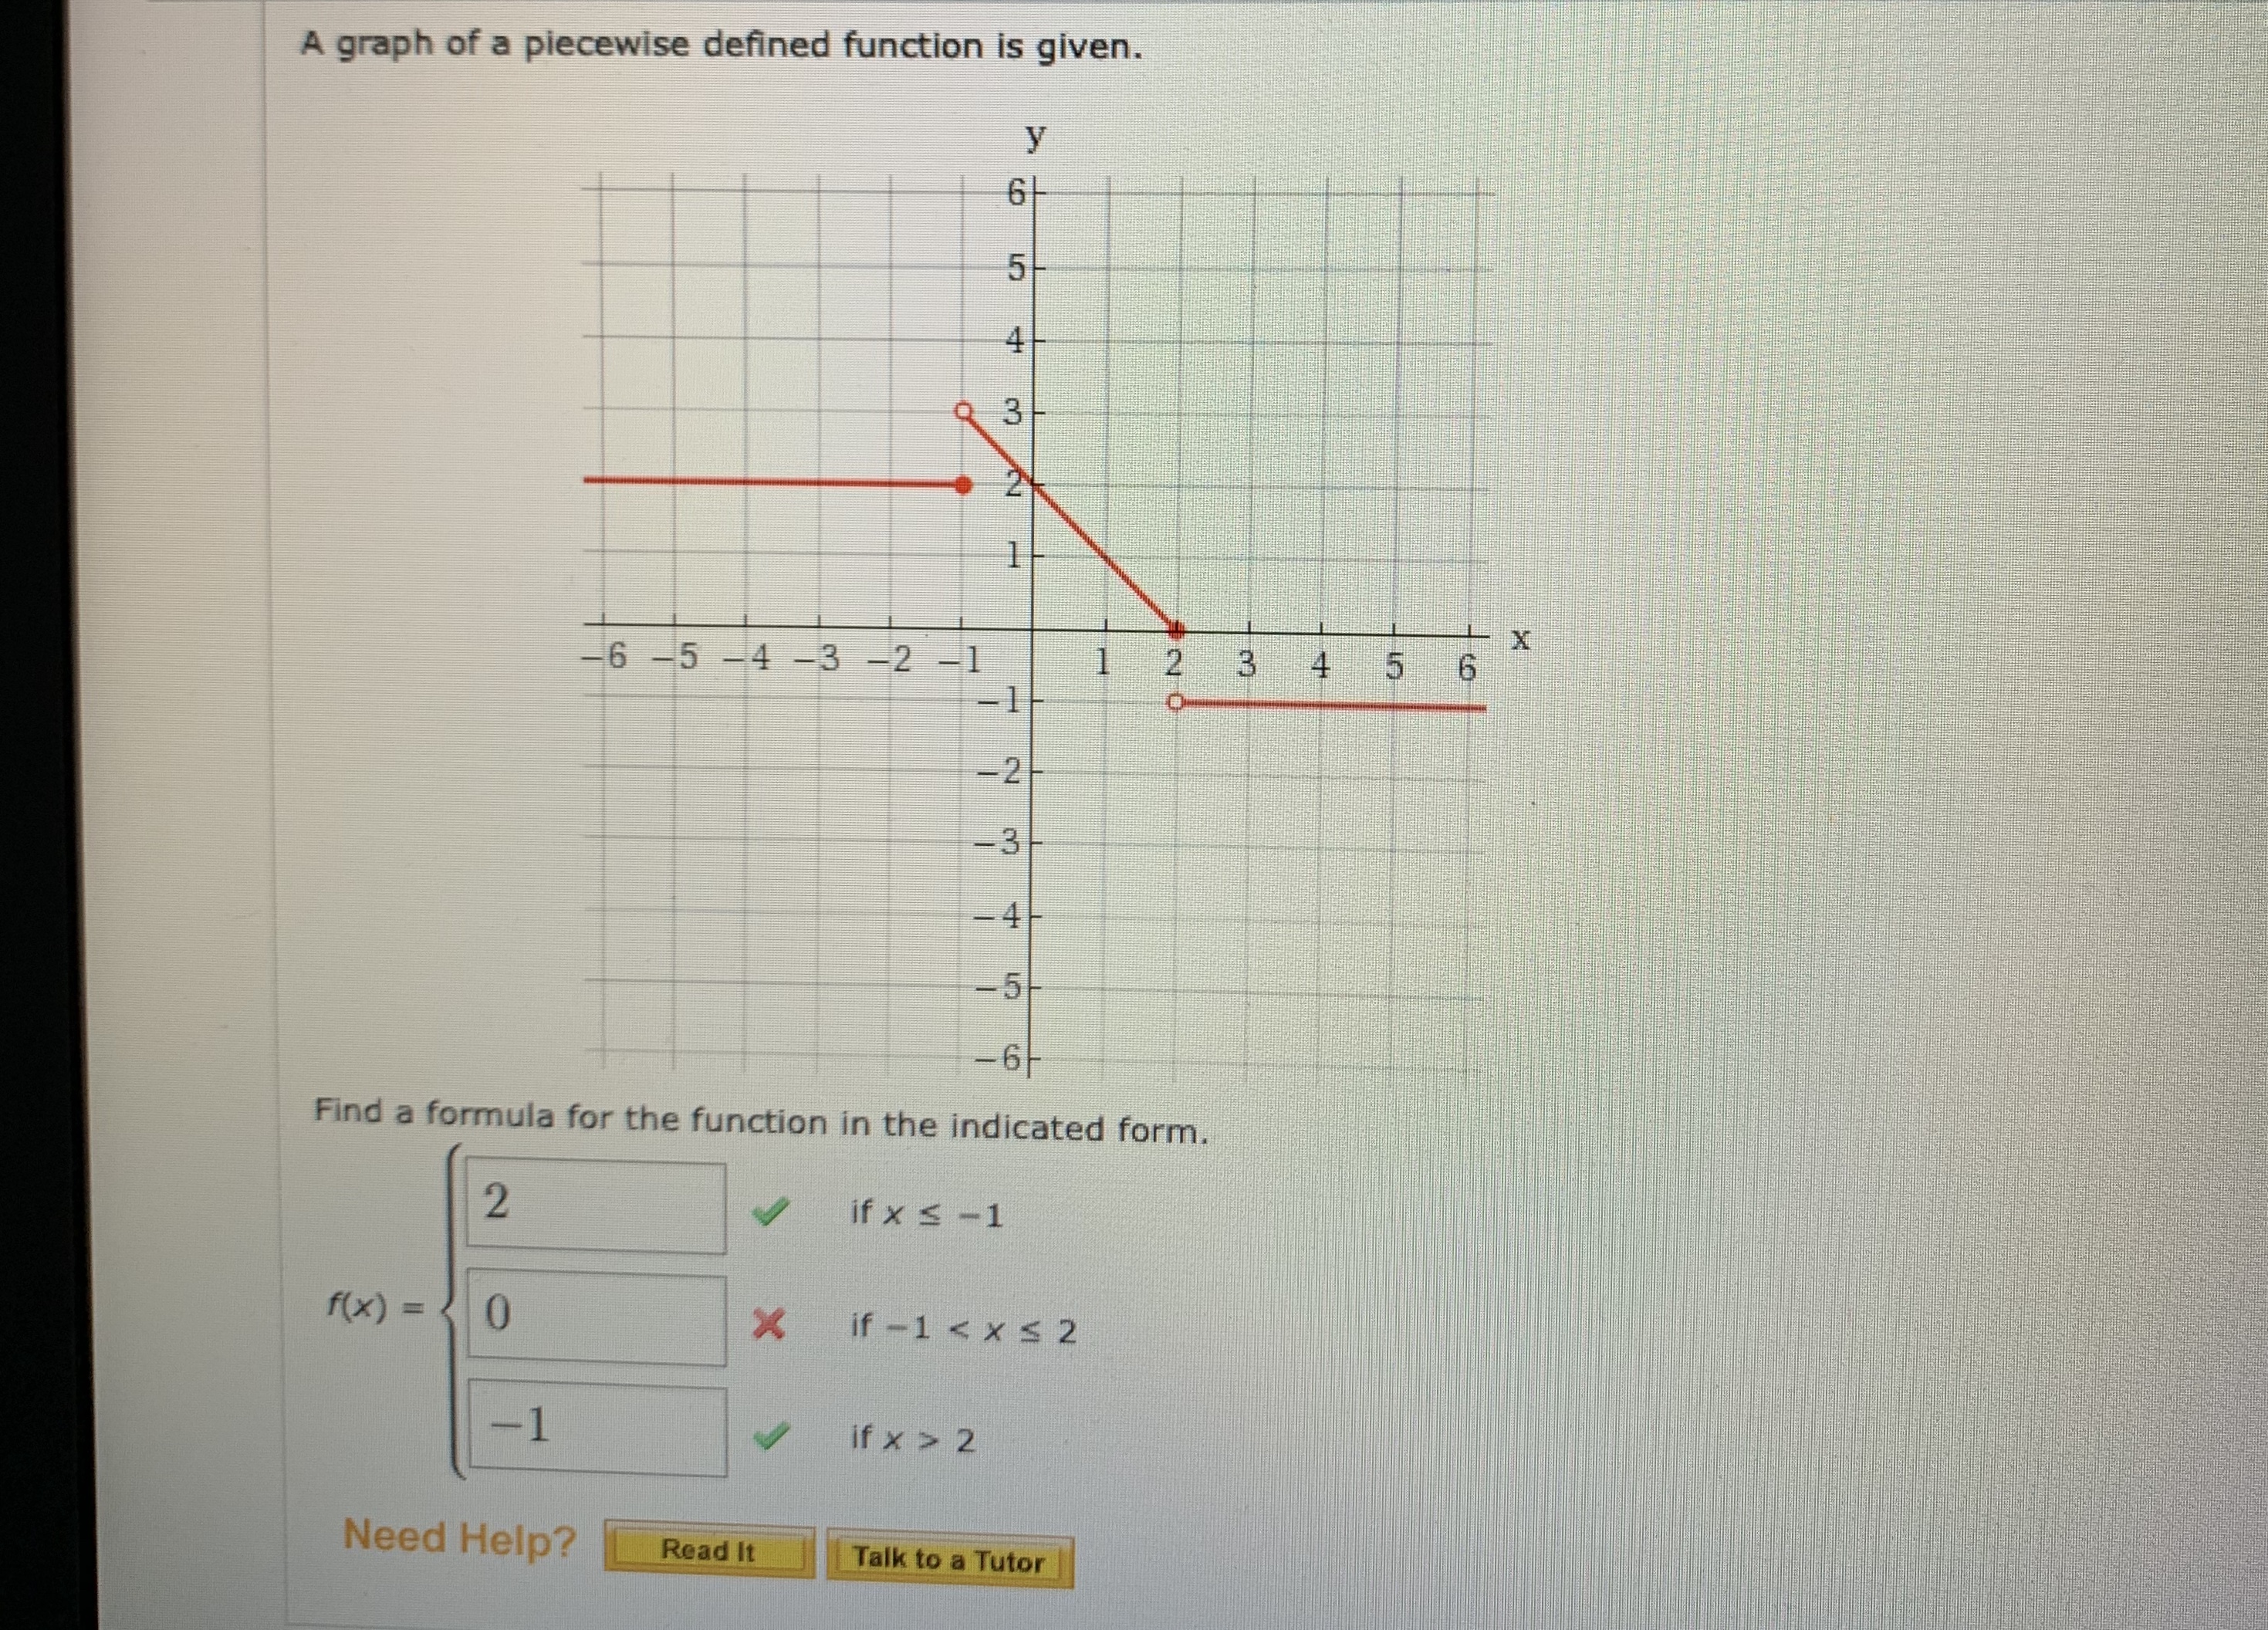 answered-a-graph-of-a-piecewise-defined-function-bartleby